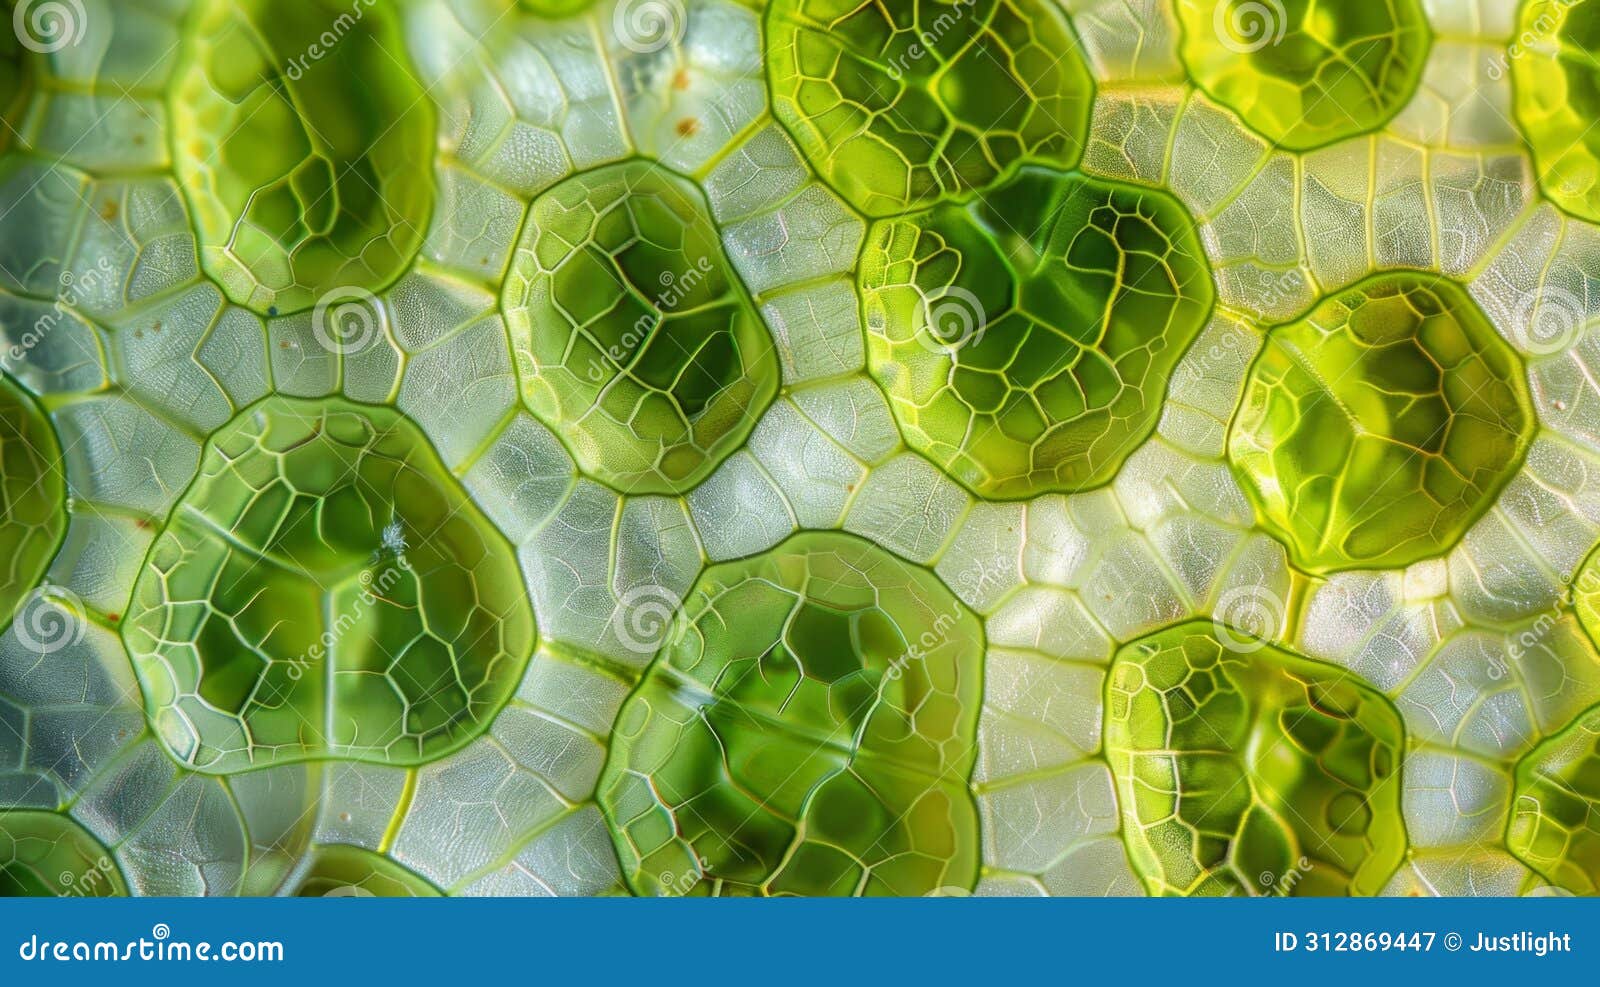 a crosssection of a plant leaf showcasing the distribution of chloroplasts throughout the mesophyll layer. .